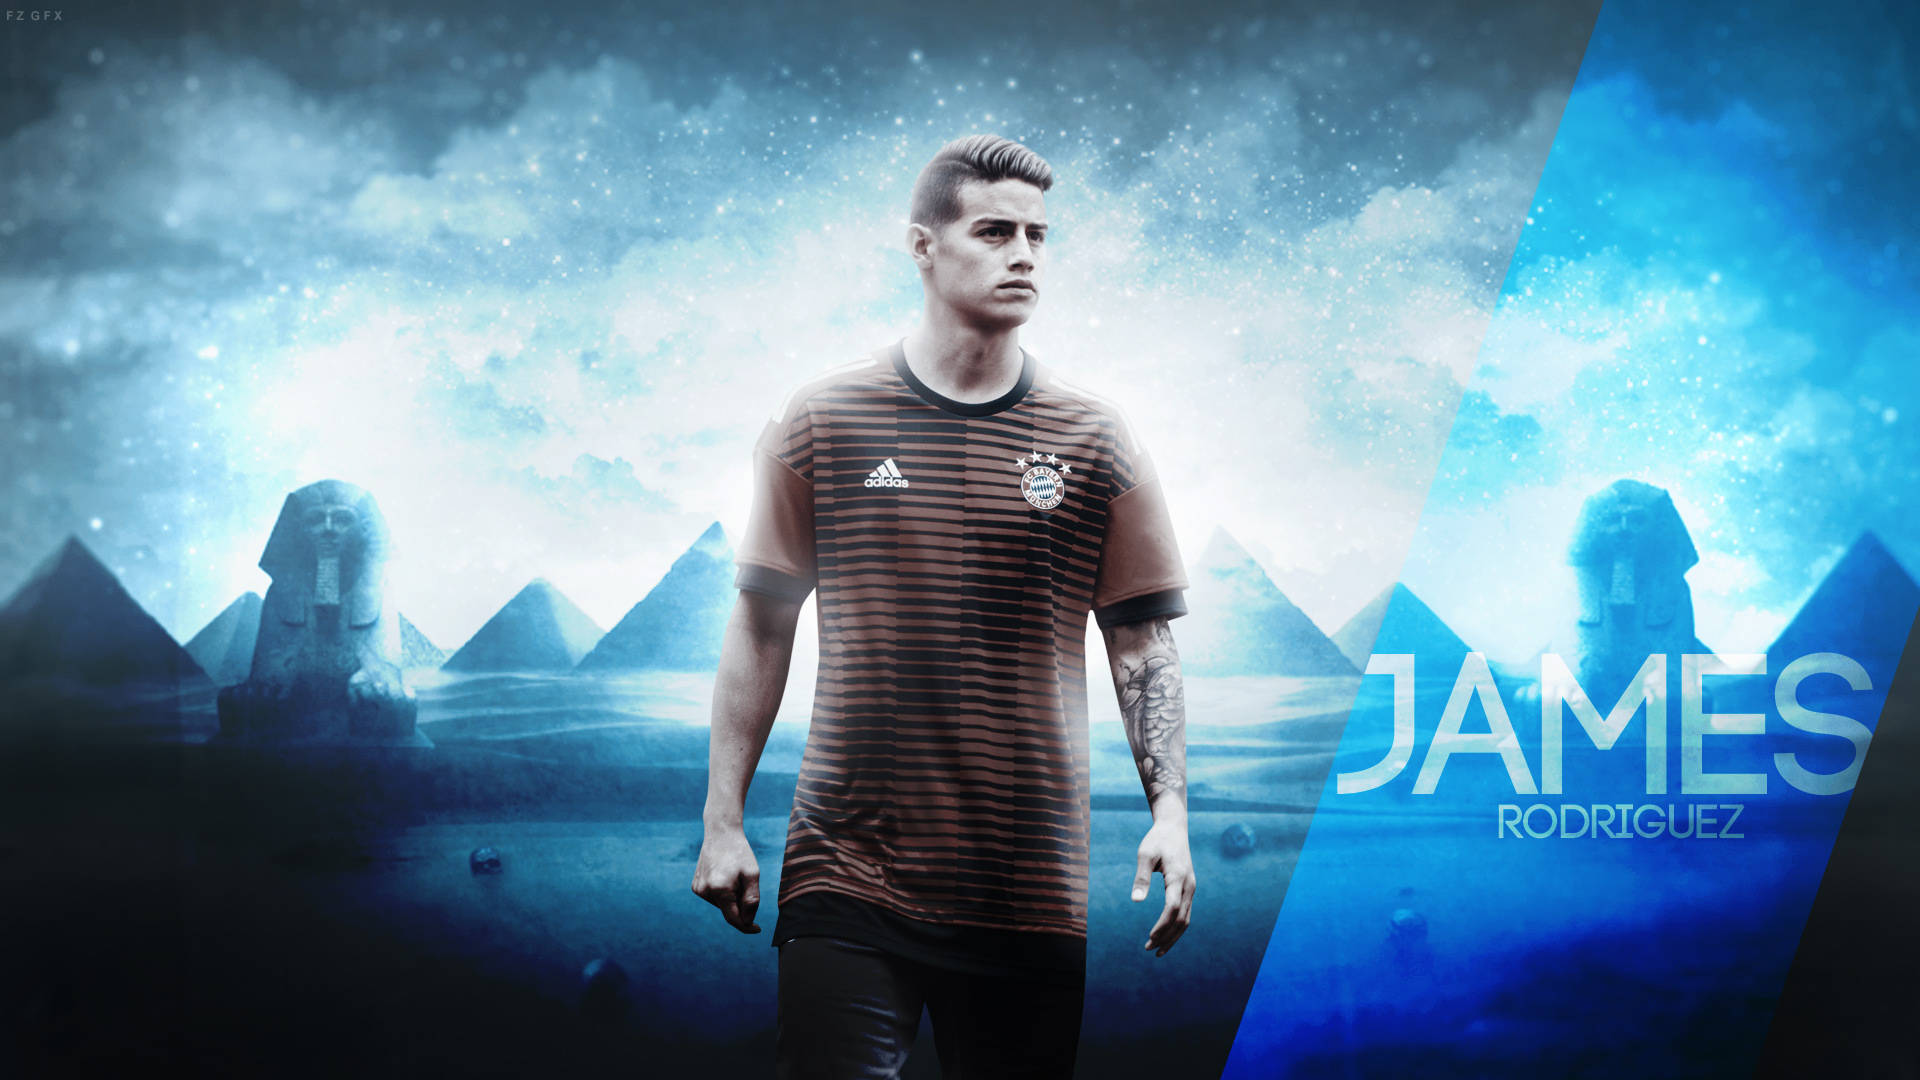 Galactic James Rodriguez Poster Background